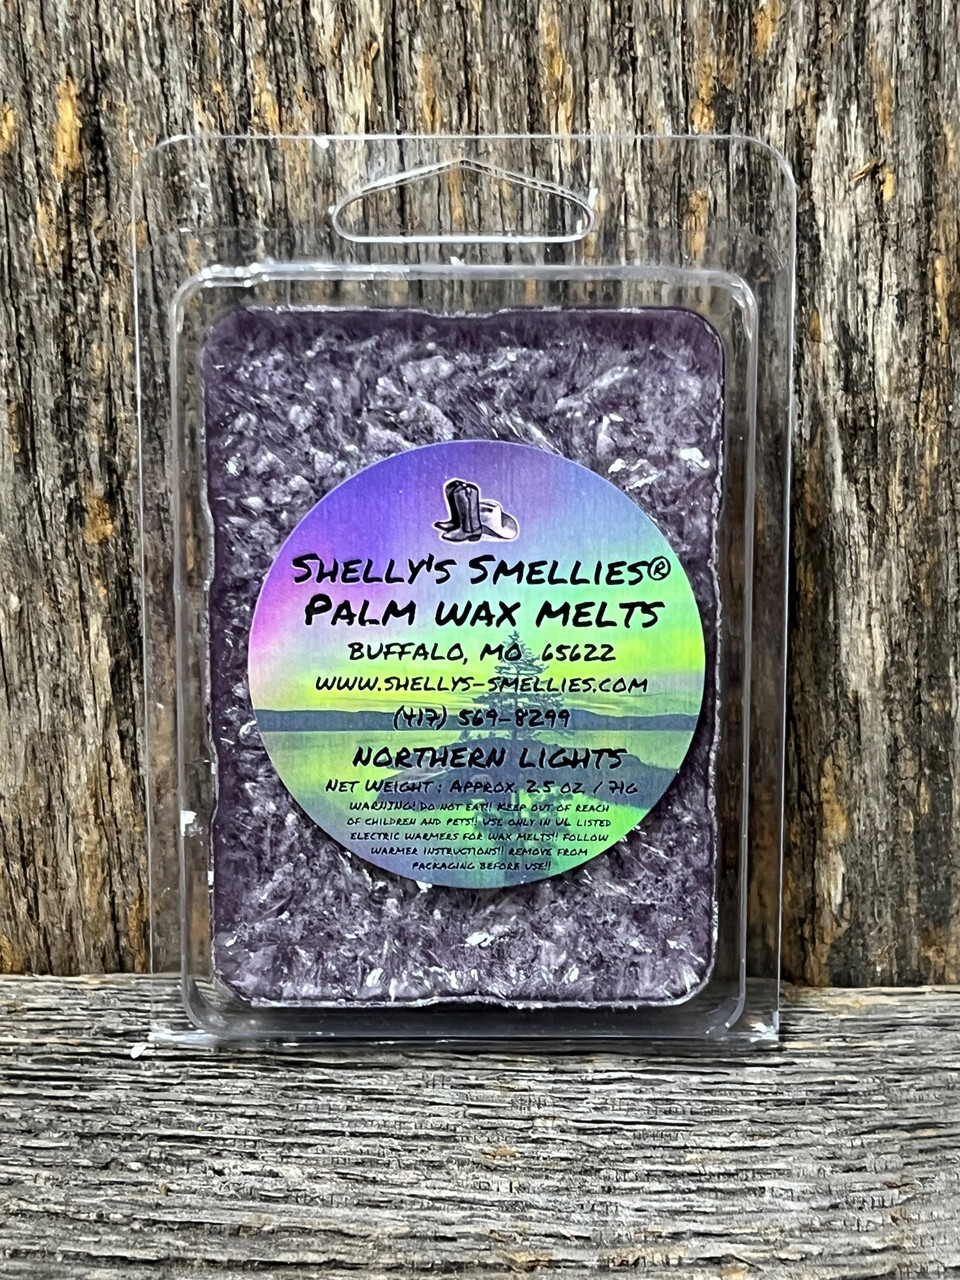 Northern Lights Wax Melt - Shelly's Smellies